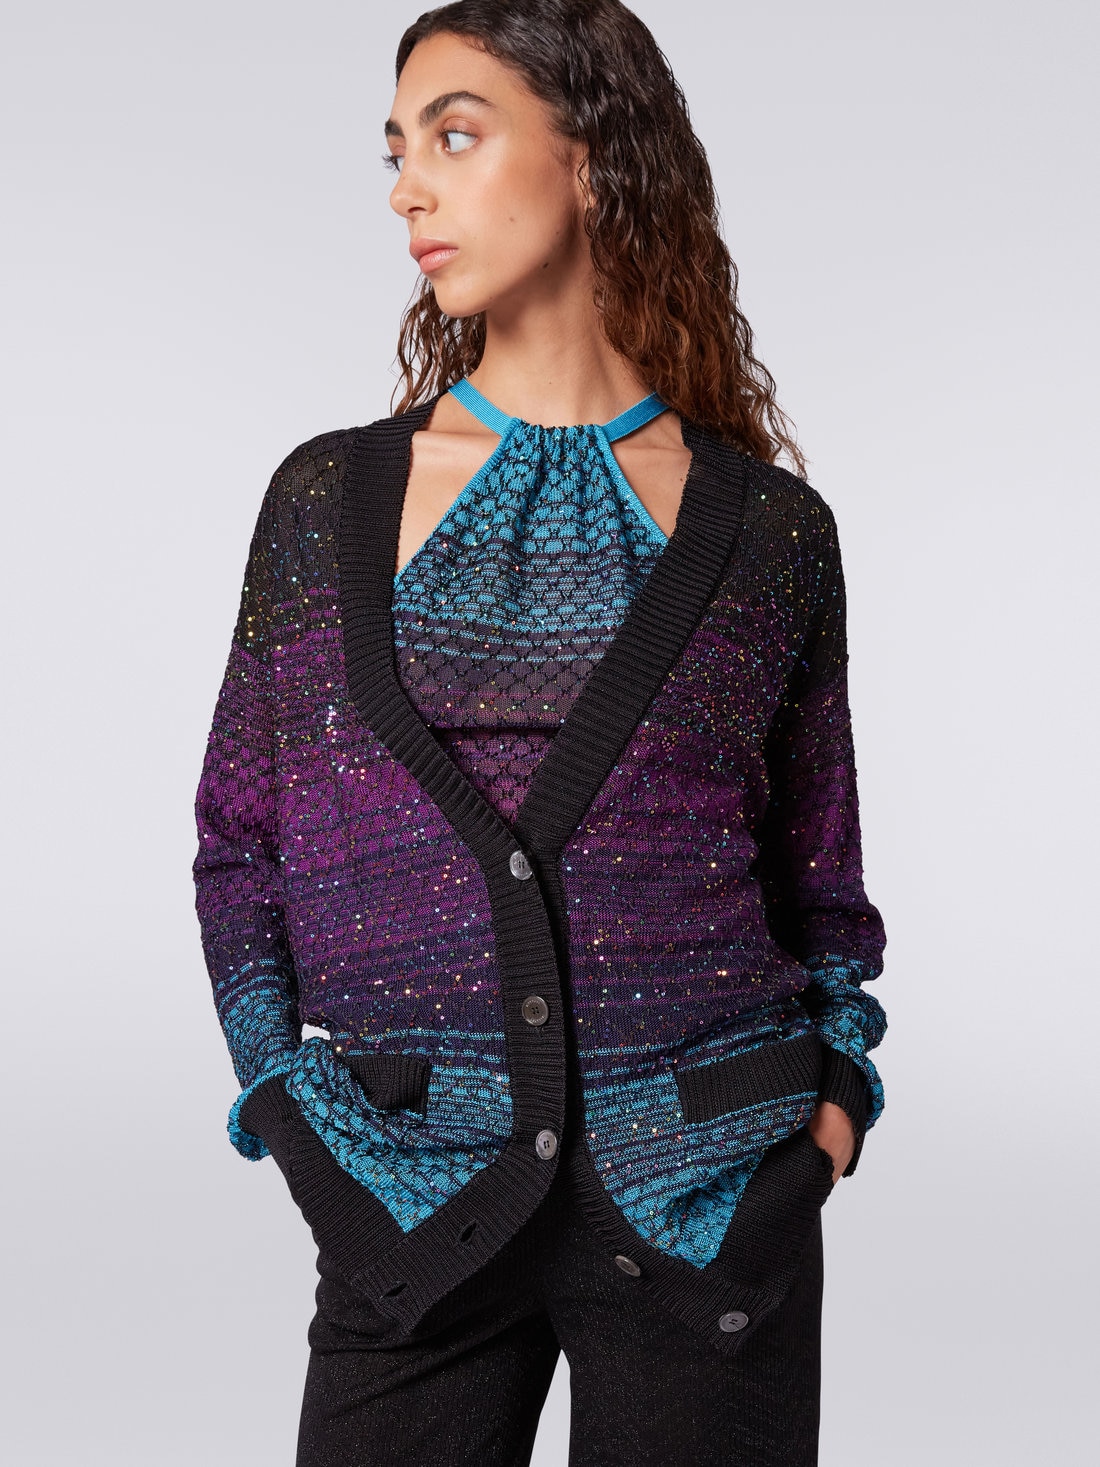 Oversized loose-knit cardigan with sequins, Turquoise, Purple & Black - 4